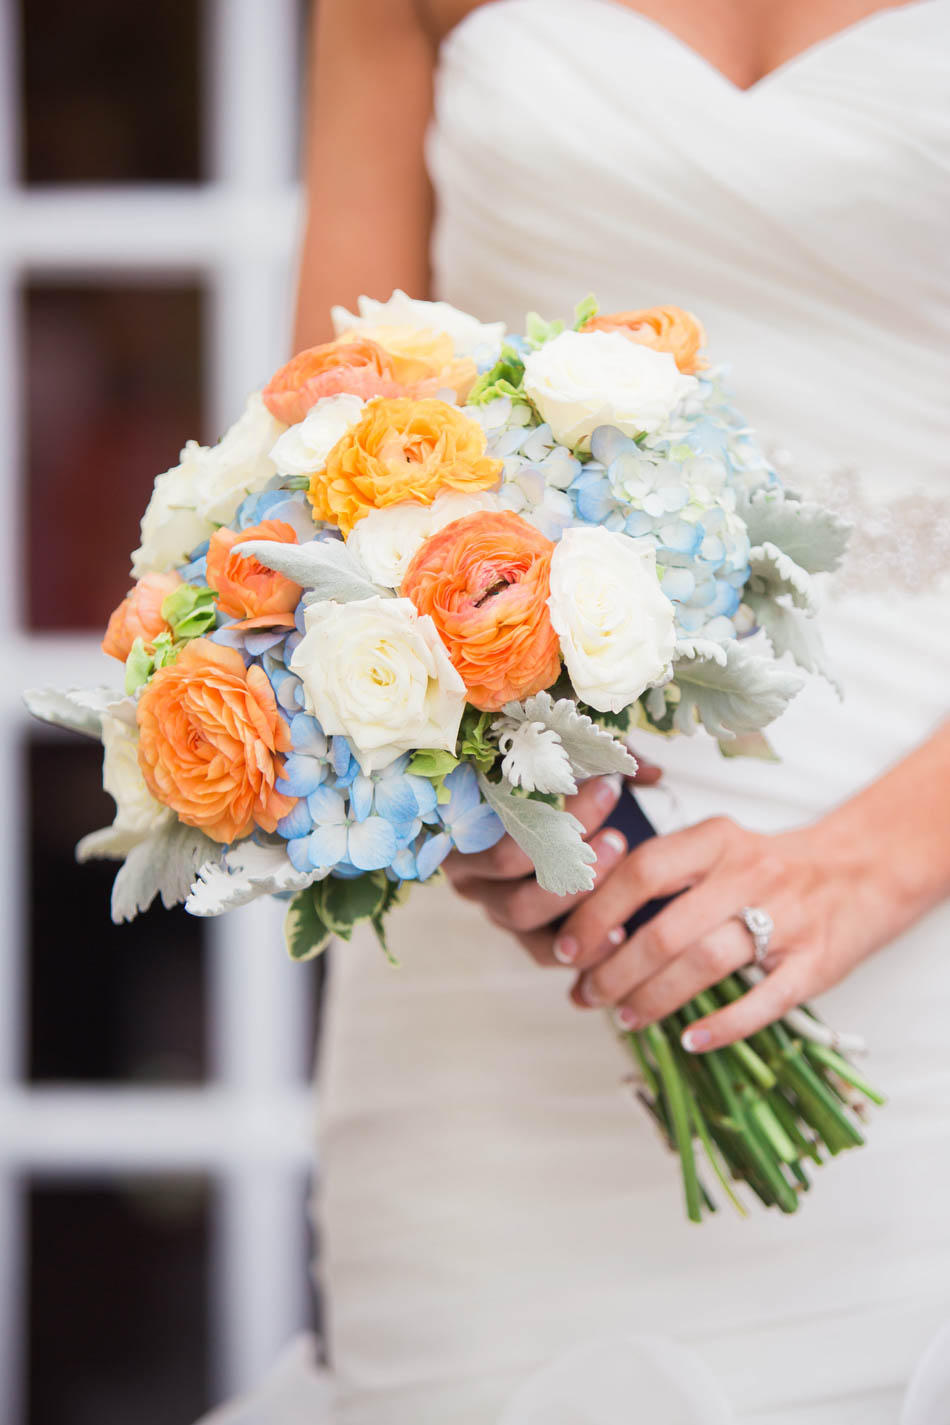 Bouquets have orange and blue flowers, Dunes West Golf and River Club, Mt Pleasant, South Carolina. Kate Timbers Photography. http://katetimbers.com